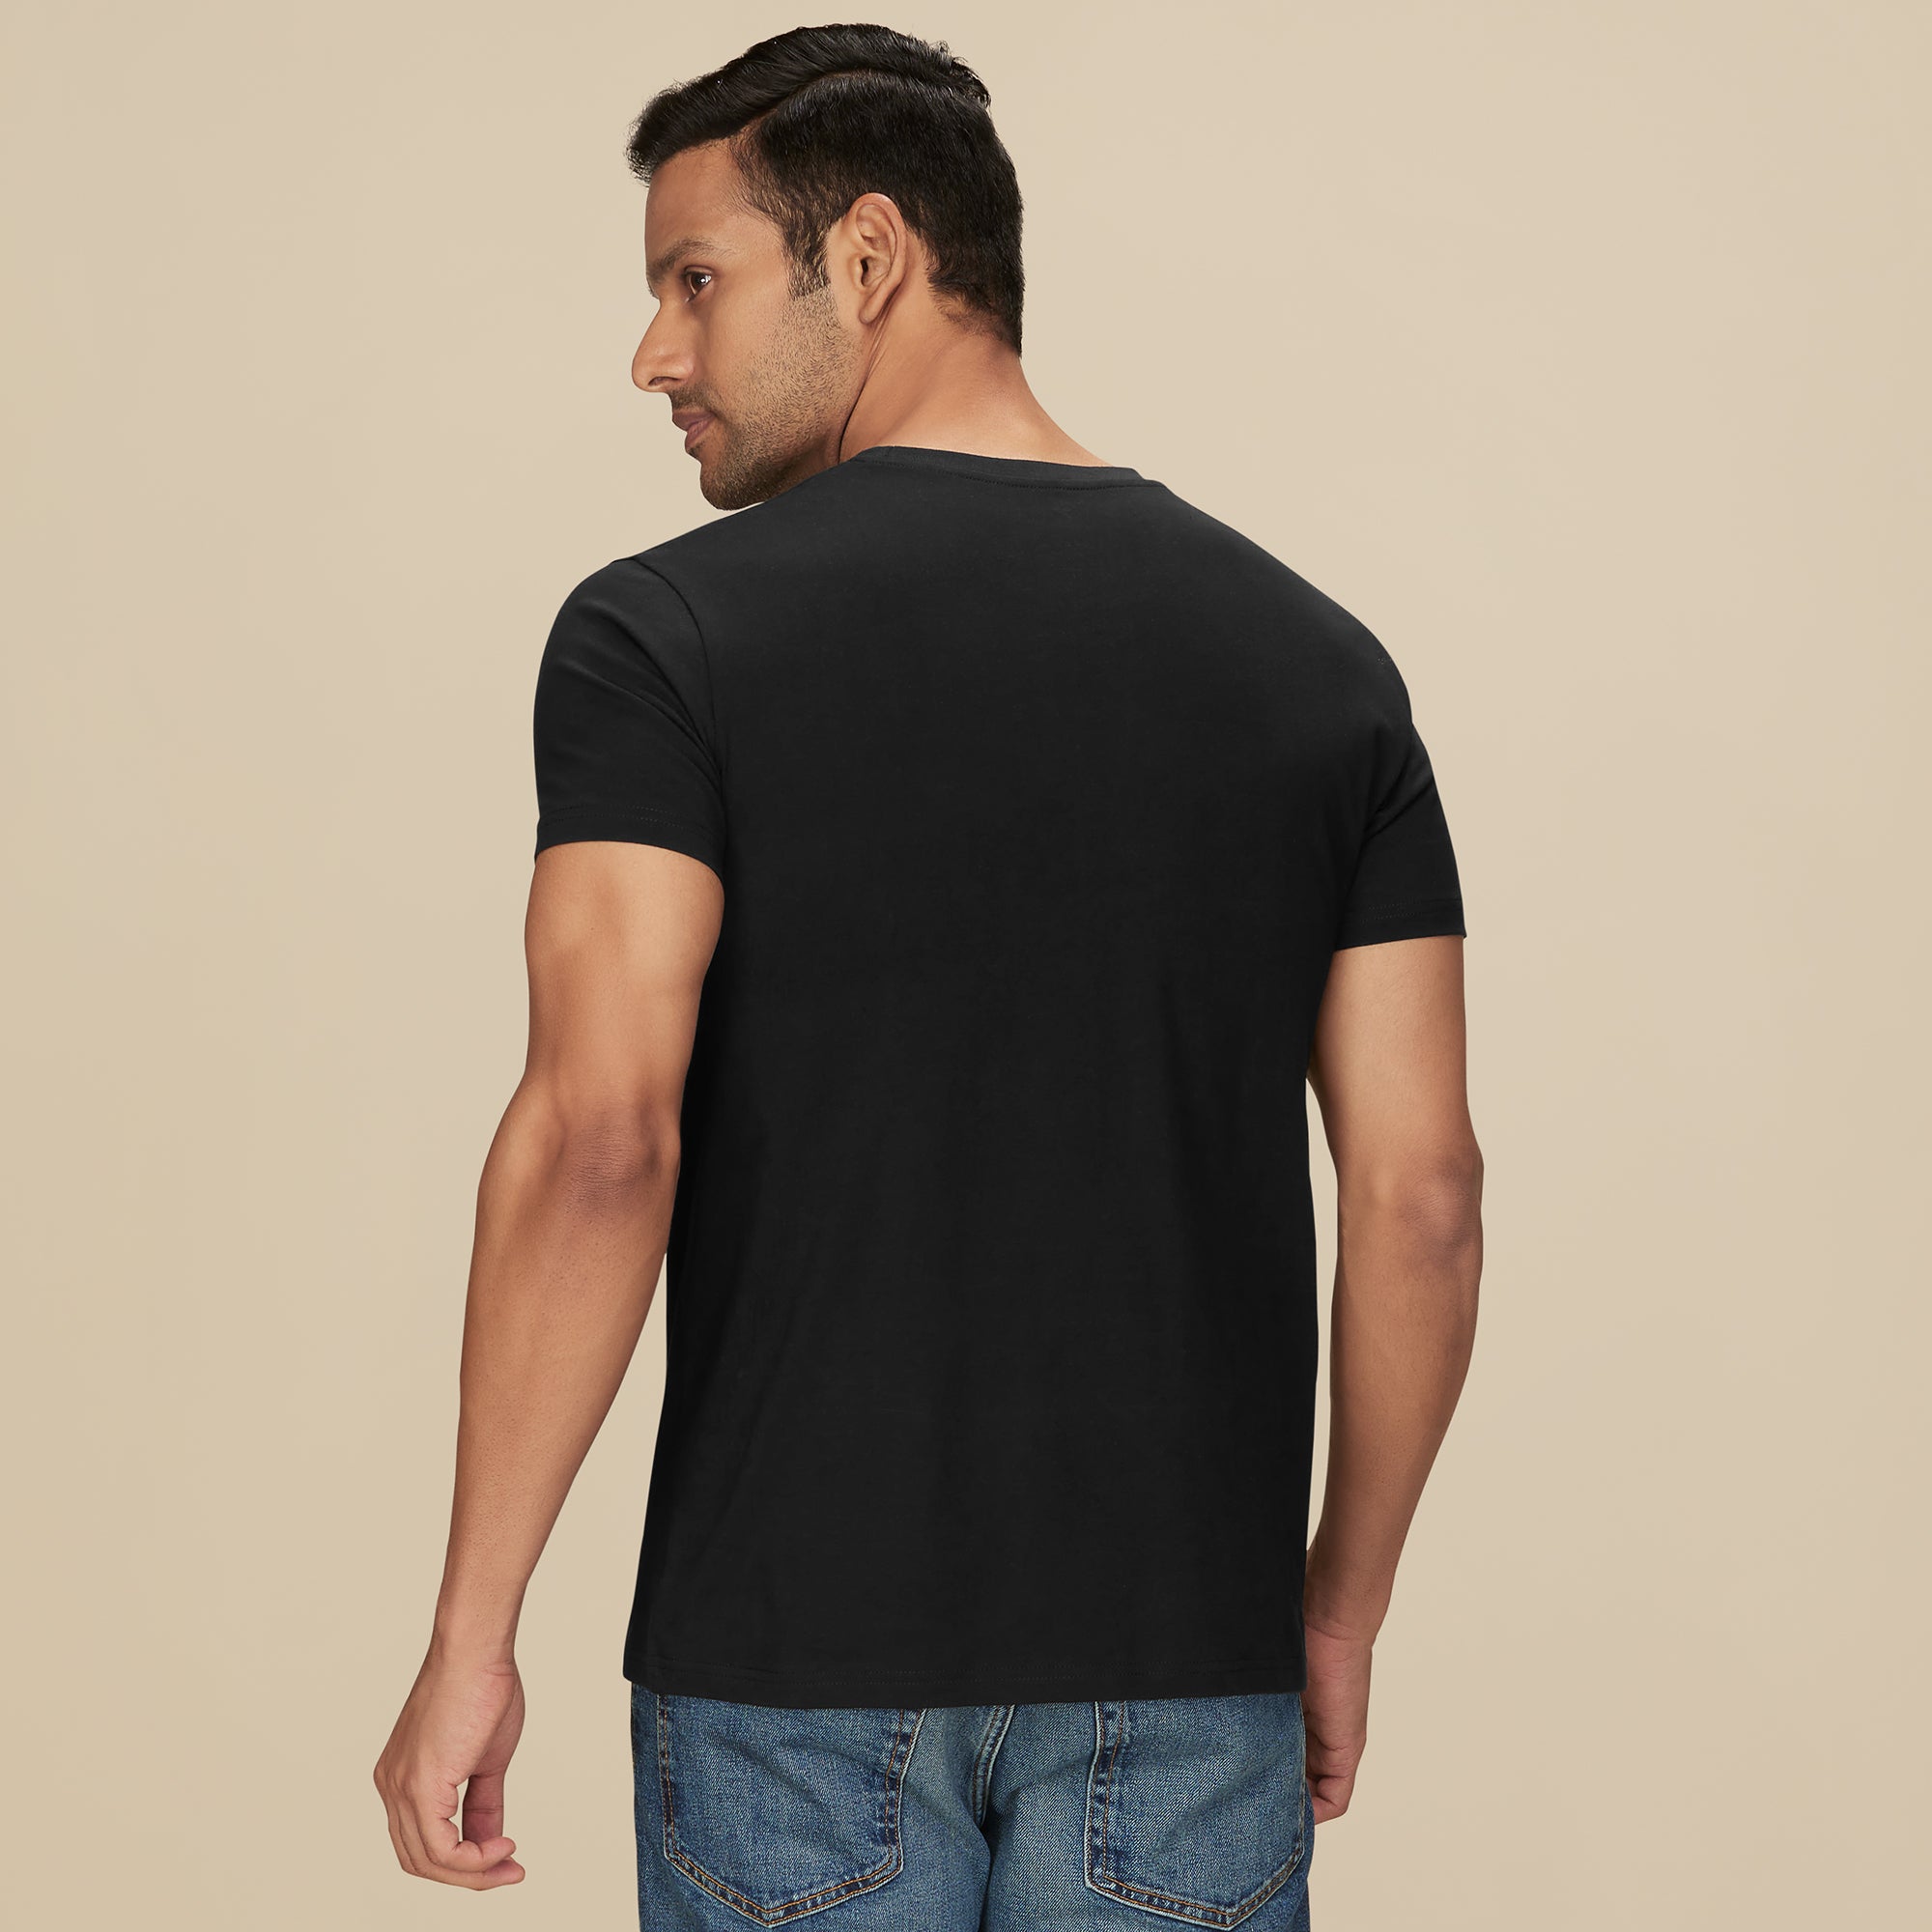 Pace Combed Cotton T-shirt for men Pitch Black - XYXX Mens Apparels